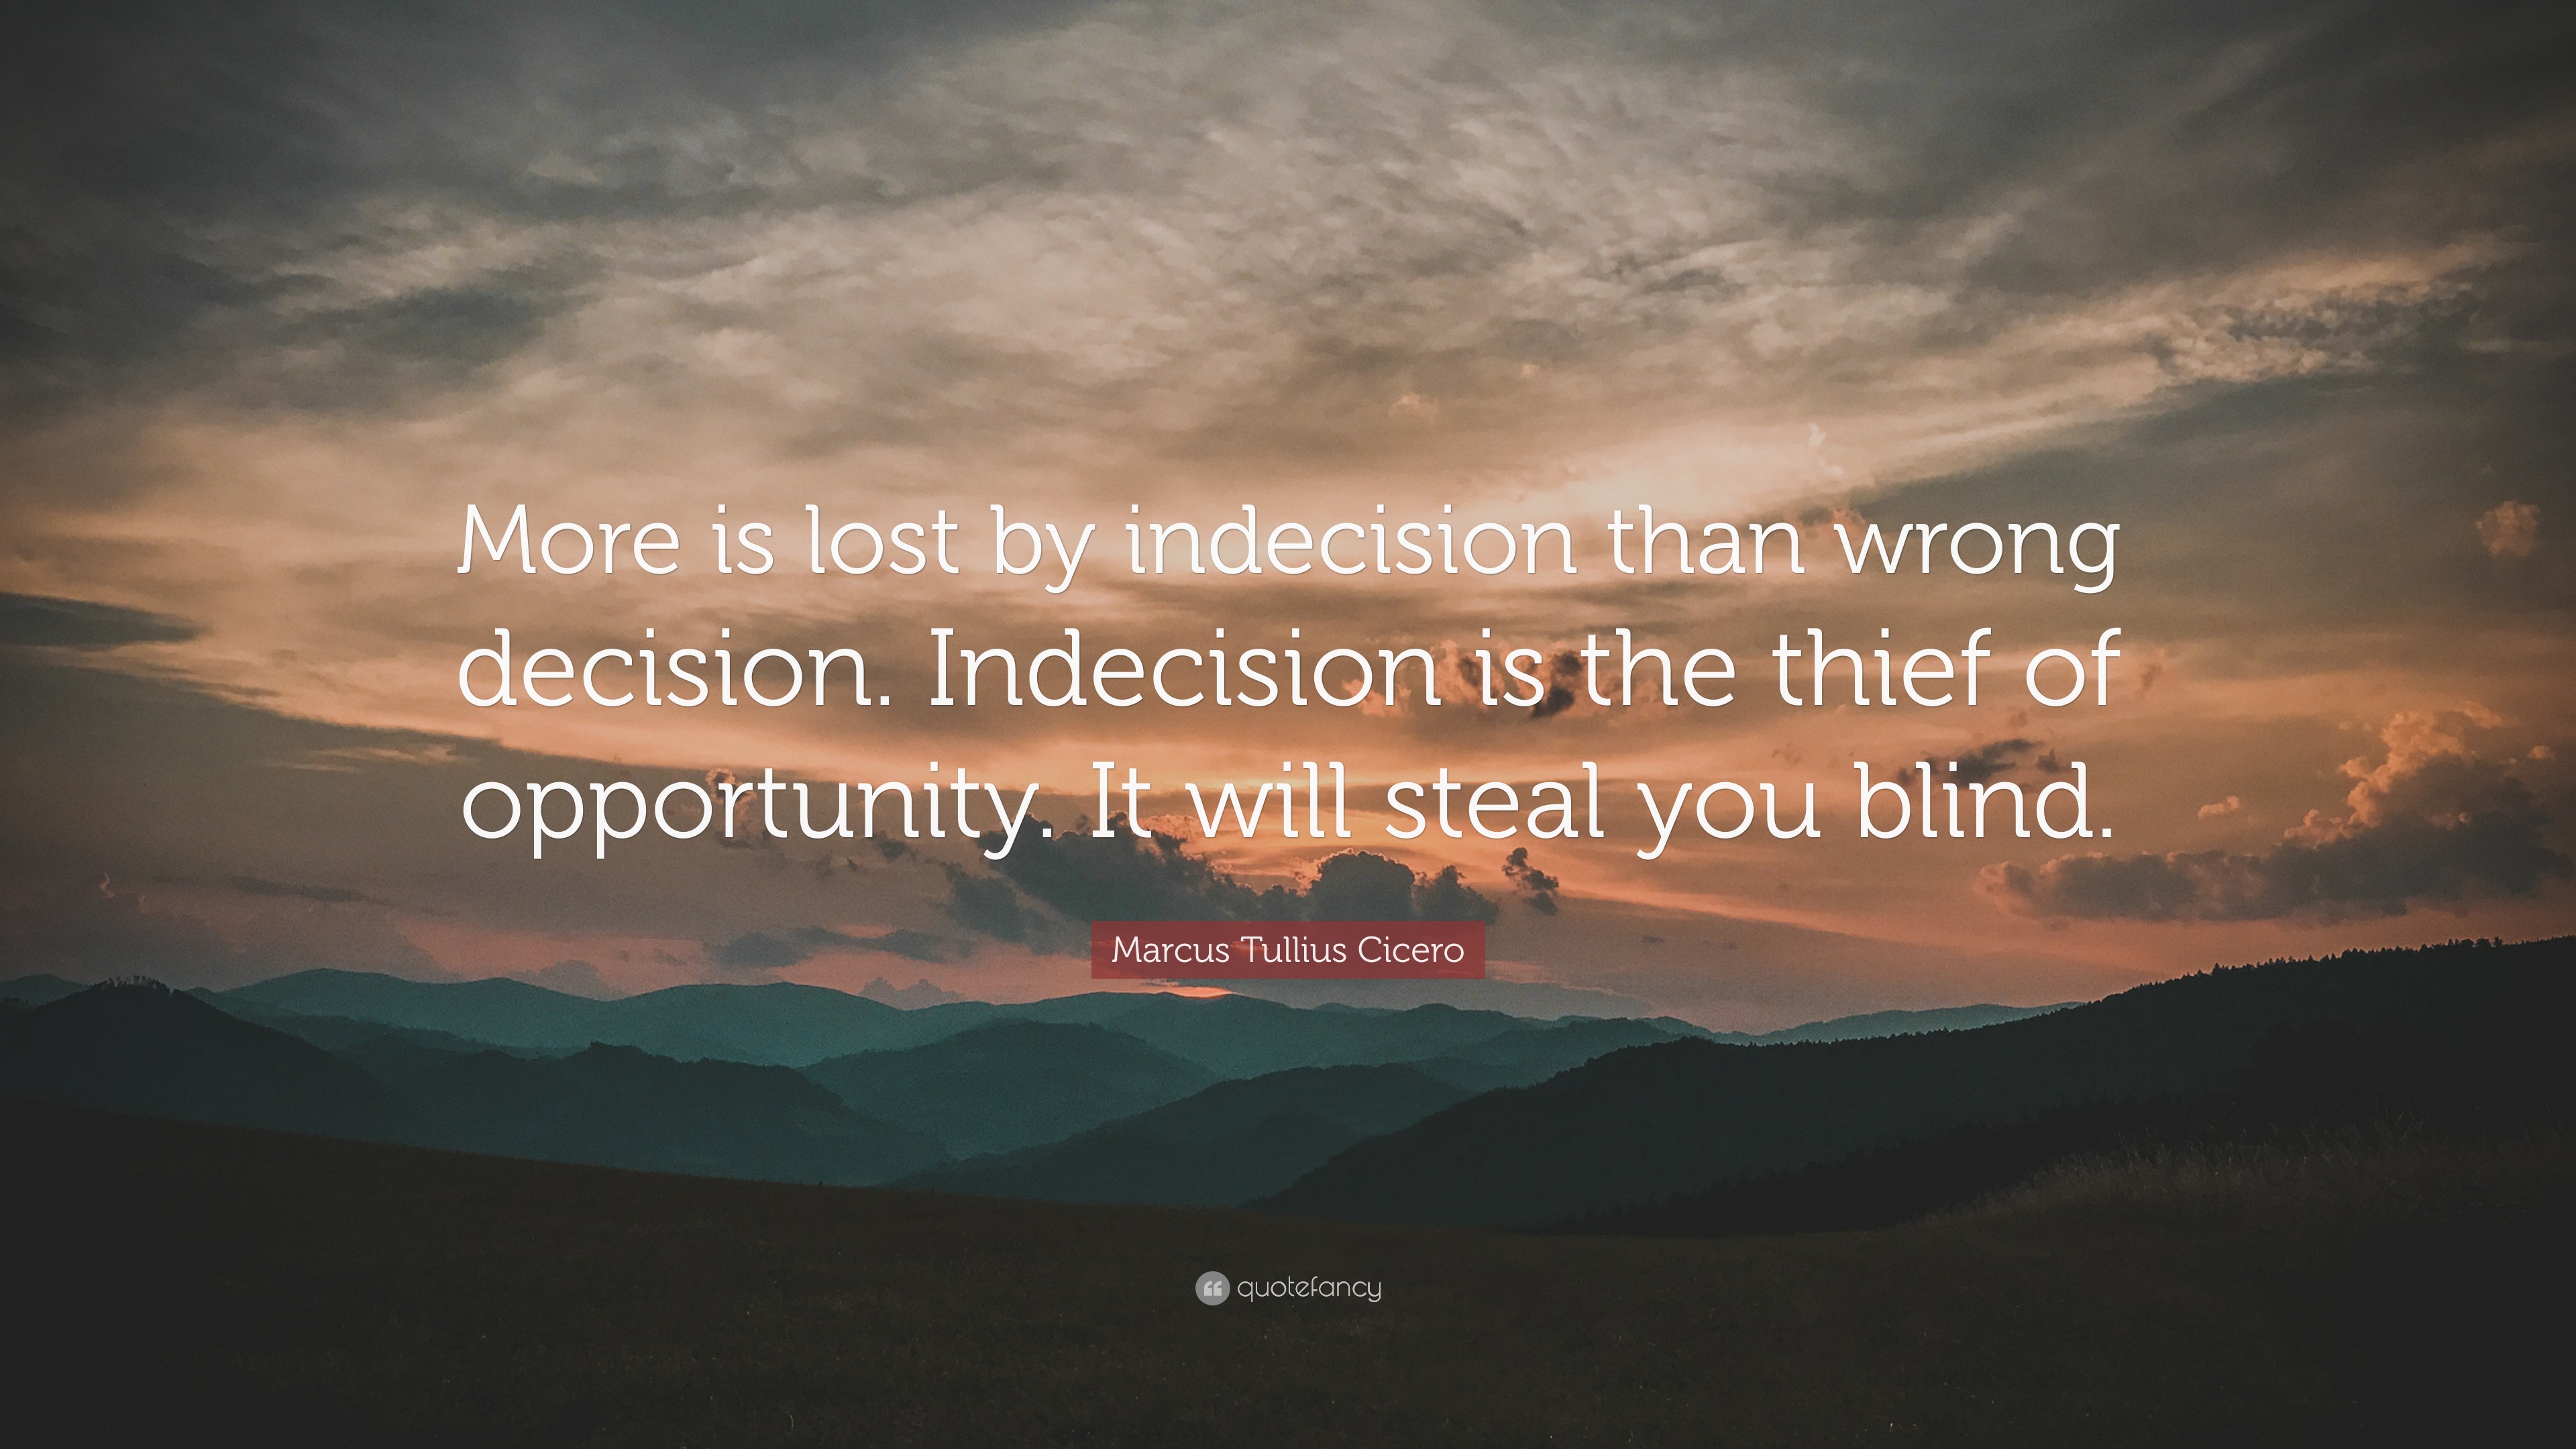 Marcus Tullius Cicero Quote “More is lost by indecision than wrong